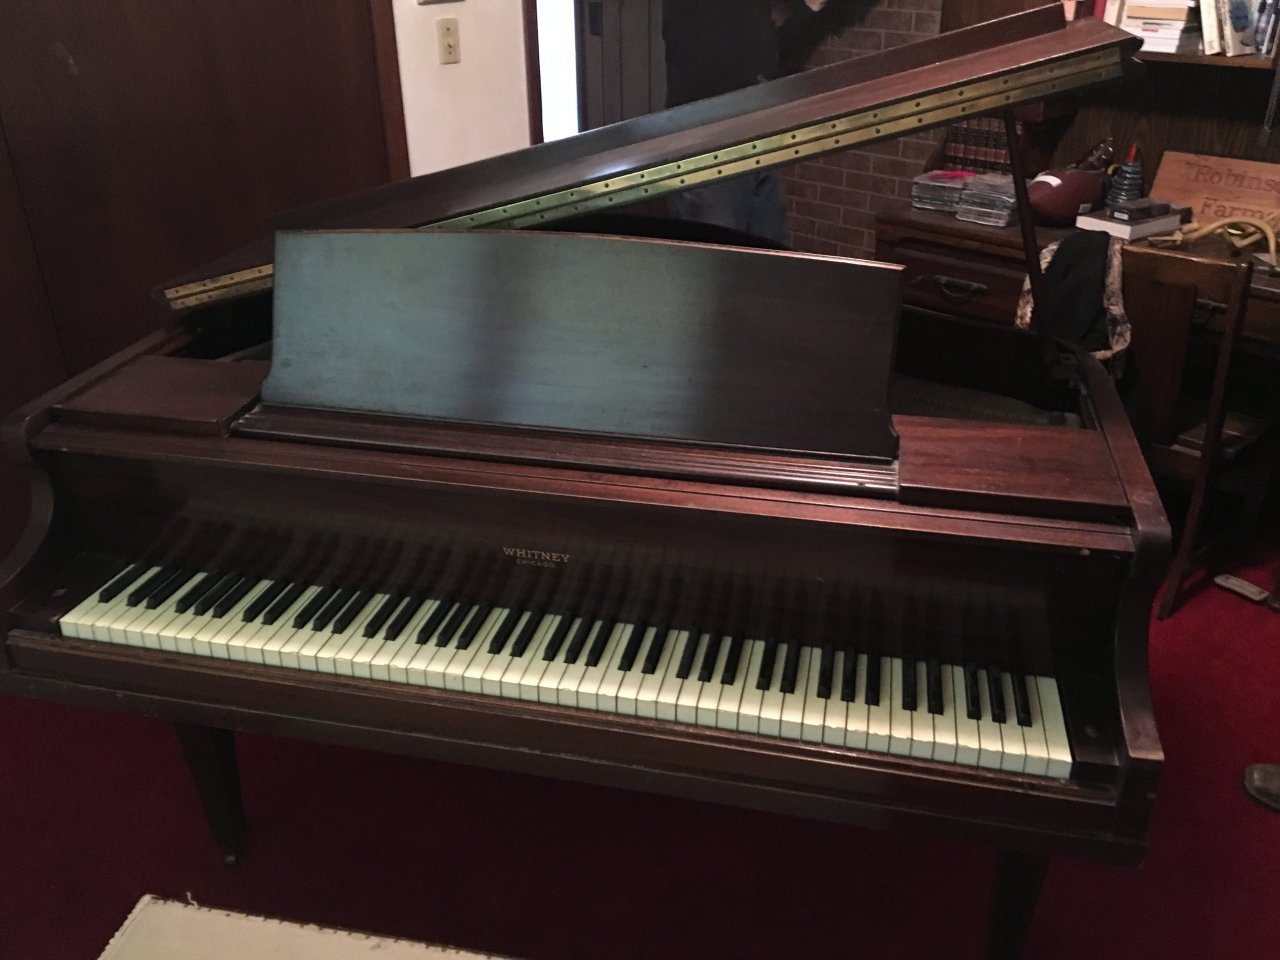 whitney piano serial number